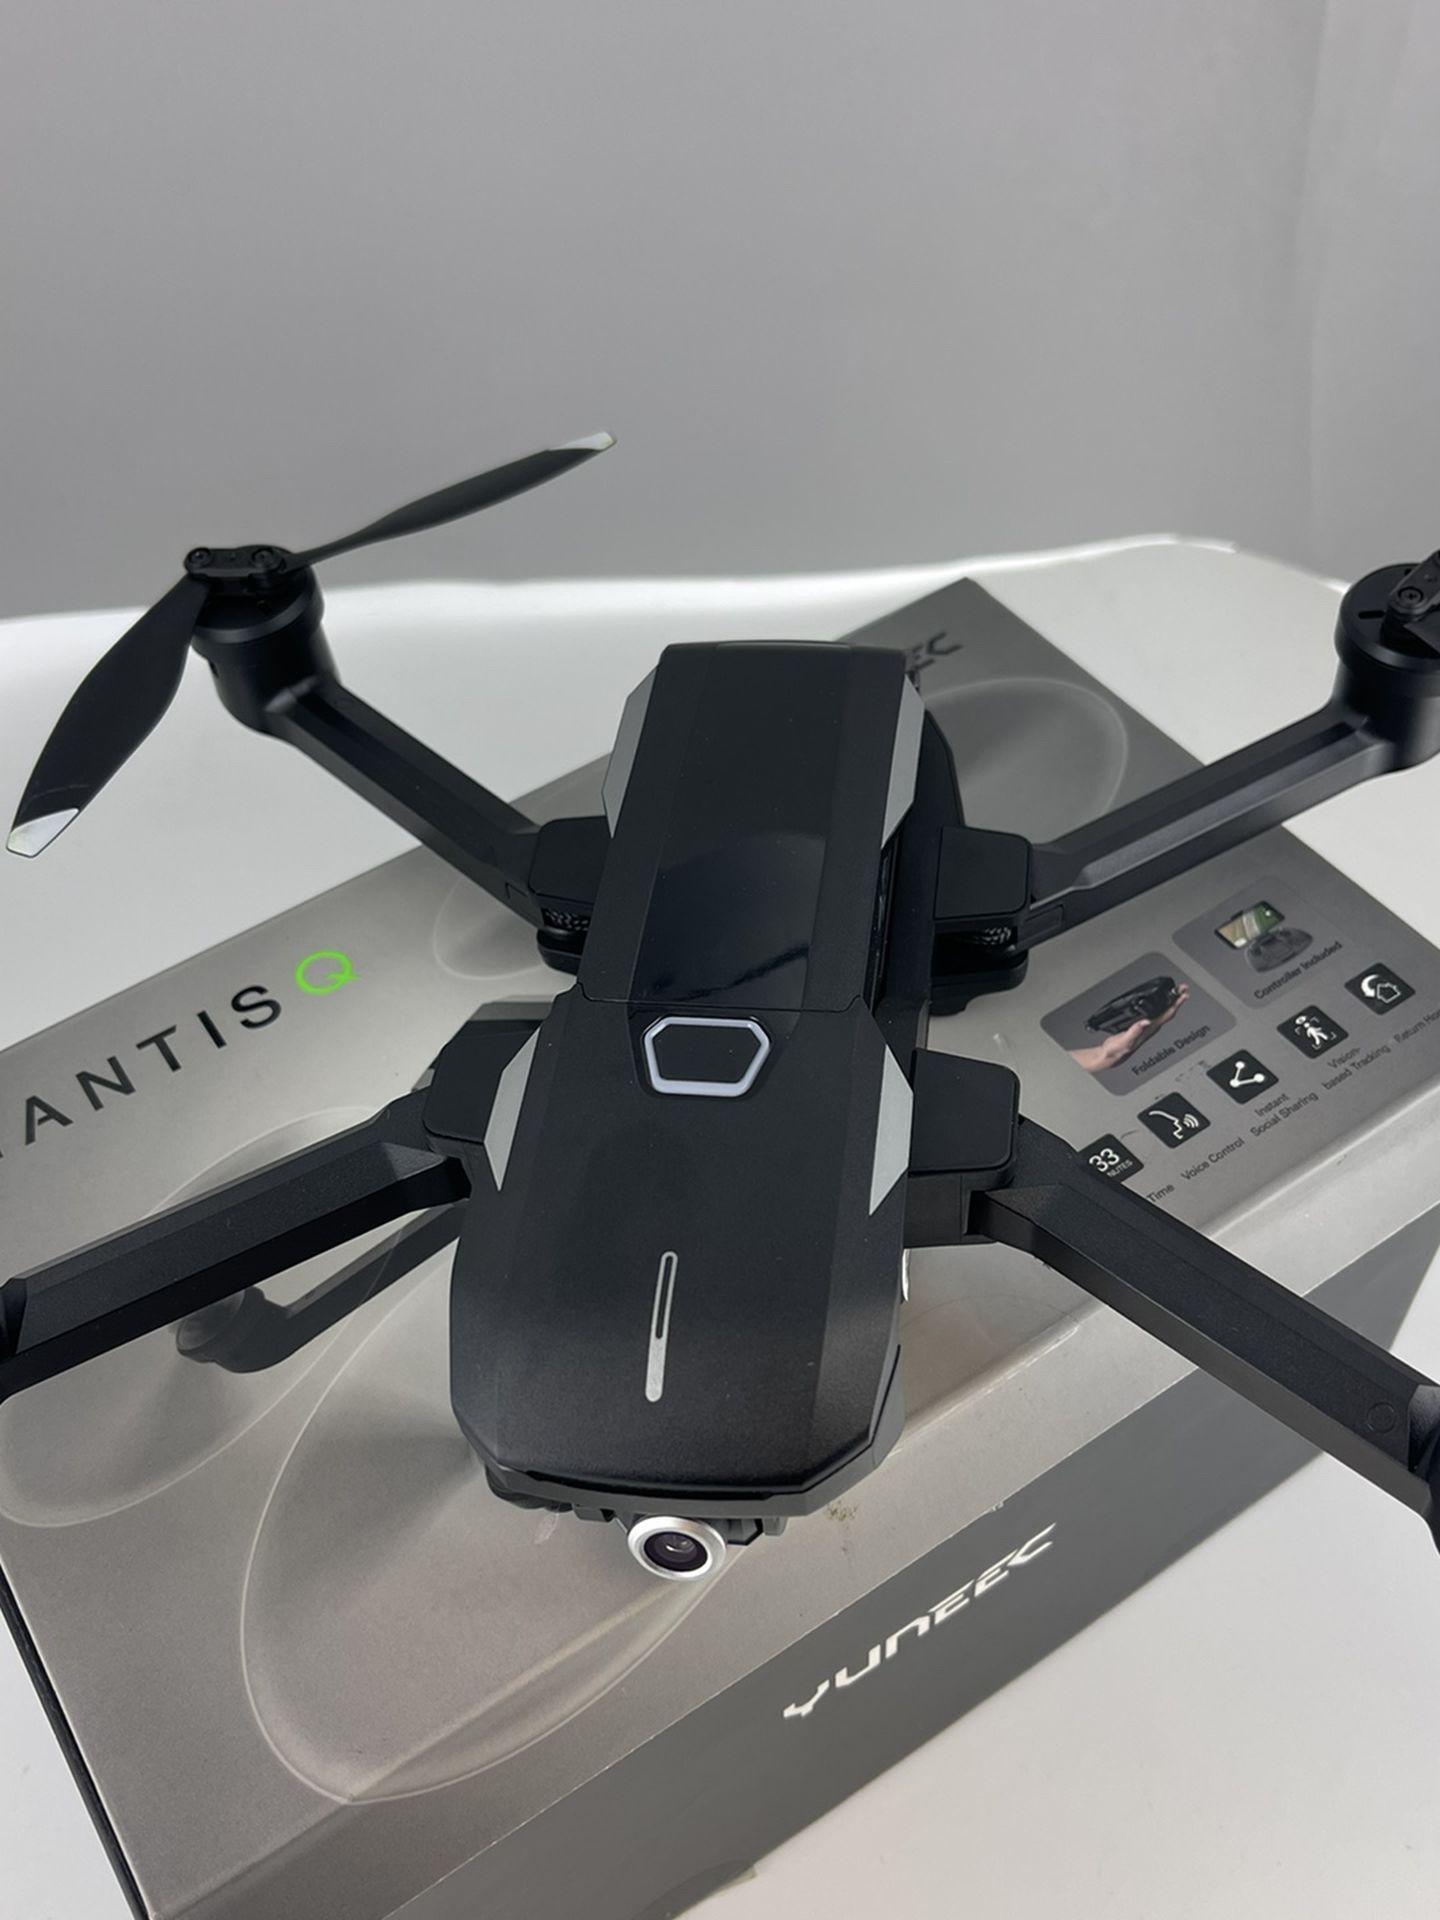 Yuneec Mantis Q Drone With 4K Camera and Controller